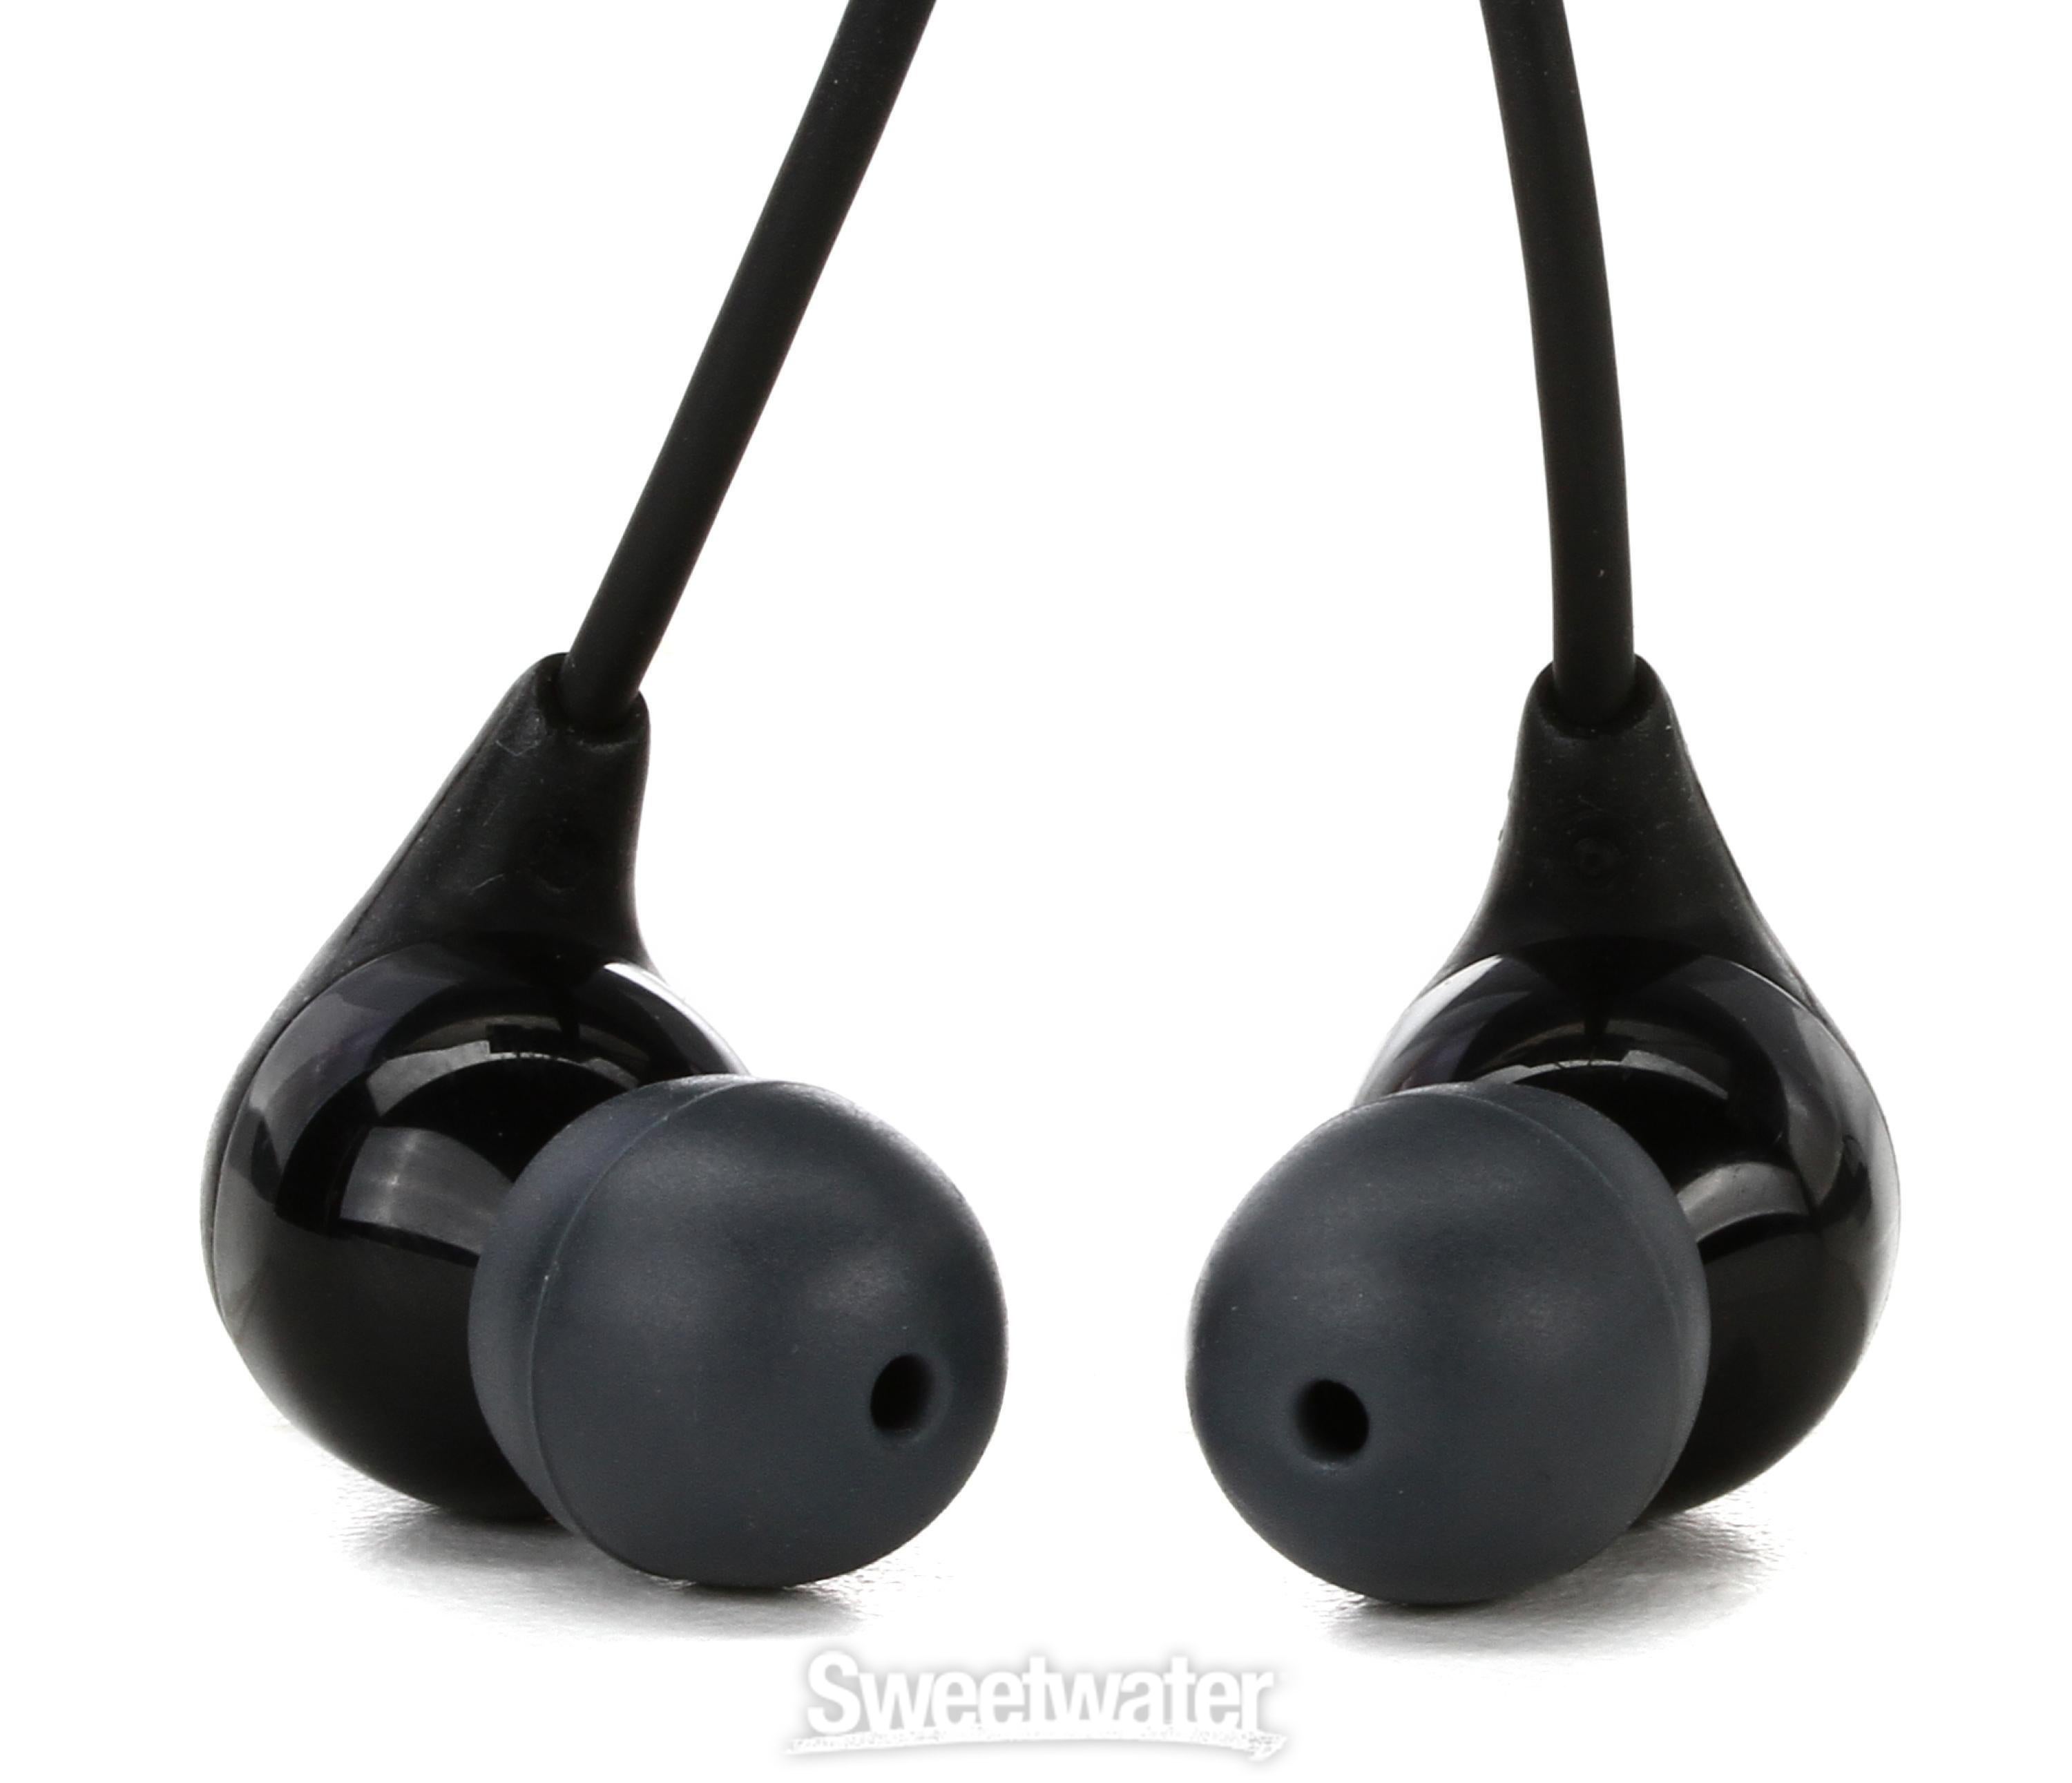 Shure SE112 Wireless Sound Isolating Earphones with Bluetooth